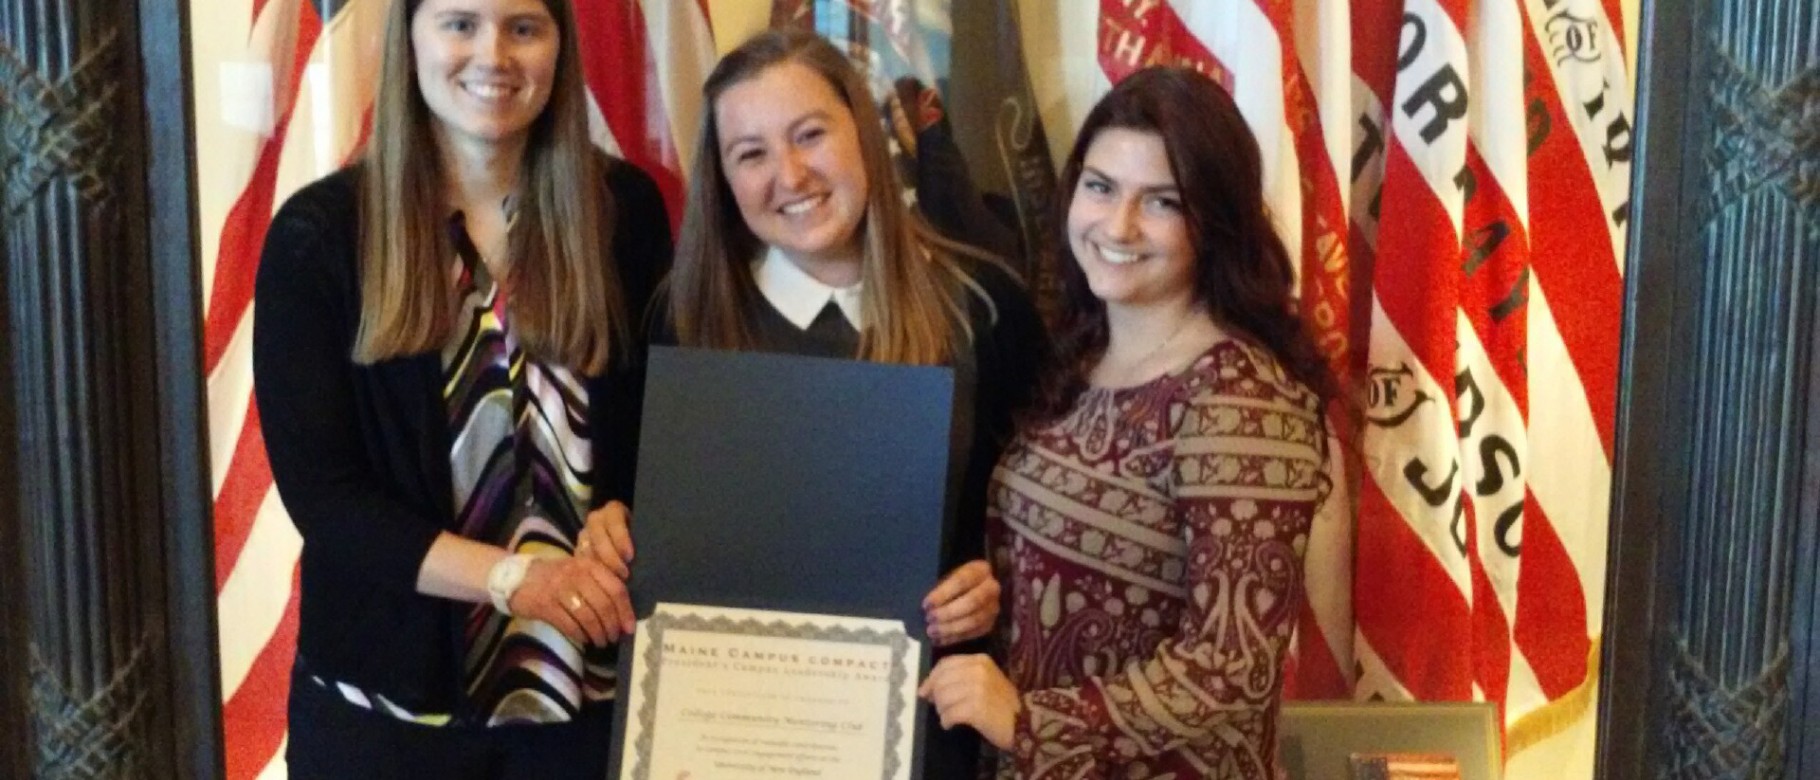 L-R: Emma Waterhouse, Samantha Mansberger and Reba Shapiro were presented with the Campus Leadership Award at a State House cere